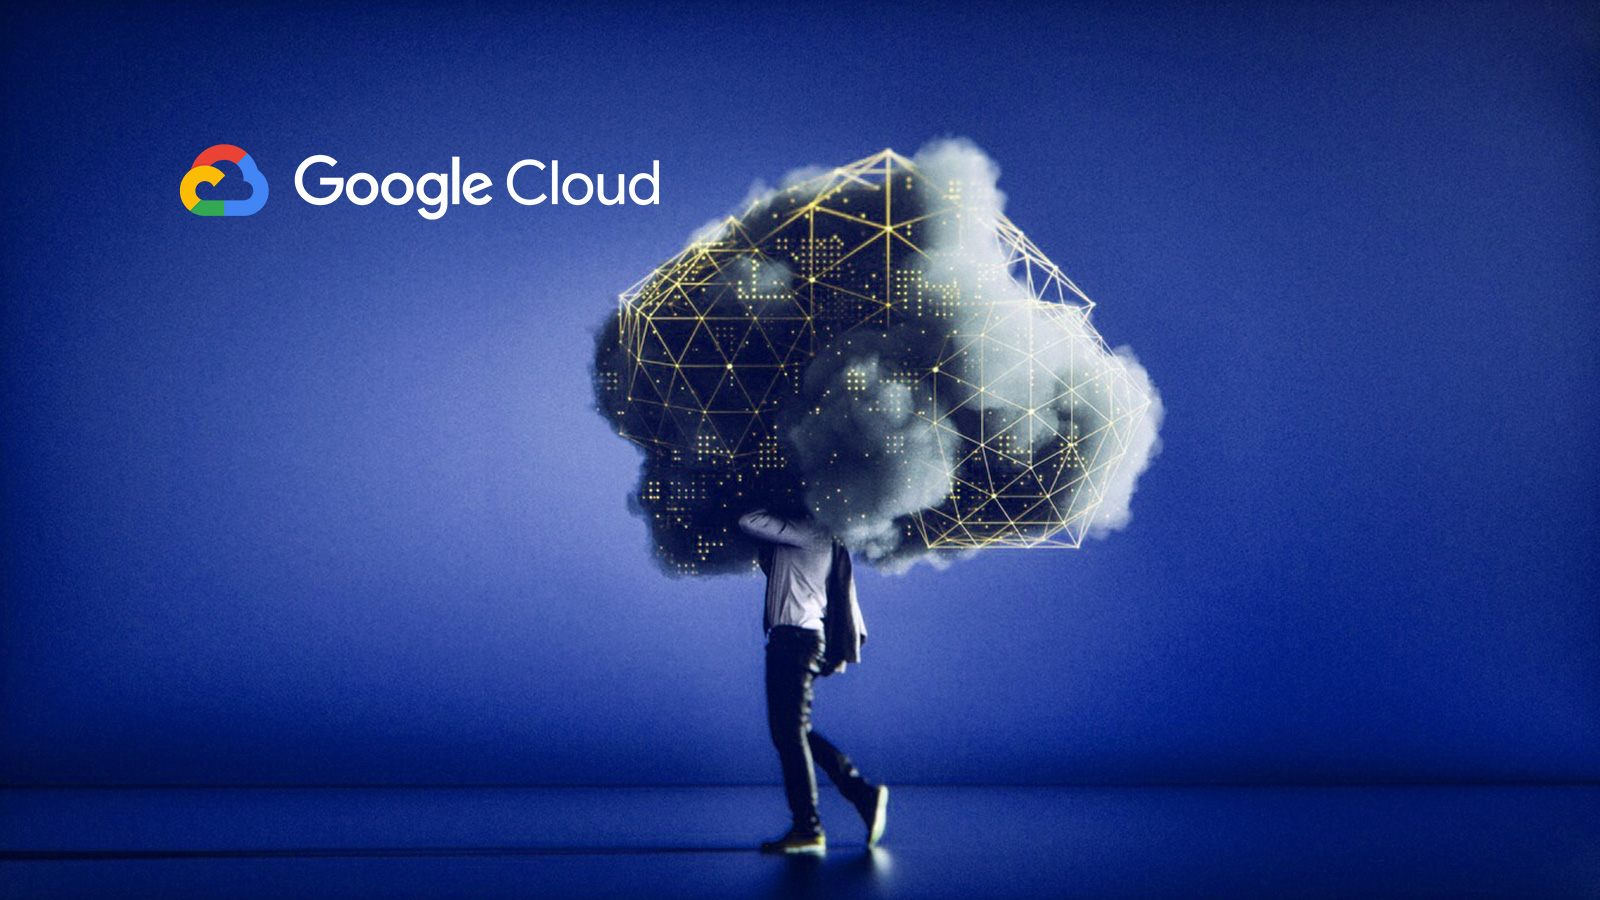 Vodafone-Chooses-Google-Cloud-as-Strategic-Cloud-Platform-for-Infrastructure_-Data-Analytics_-and-Machine-Learning.jpg (390 KB)